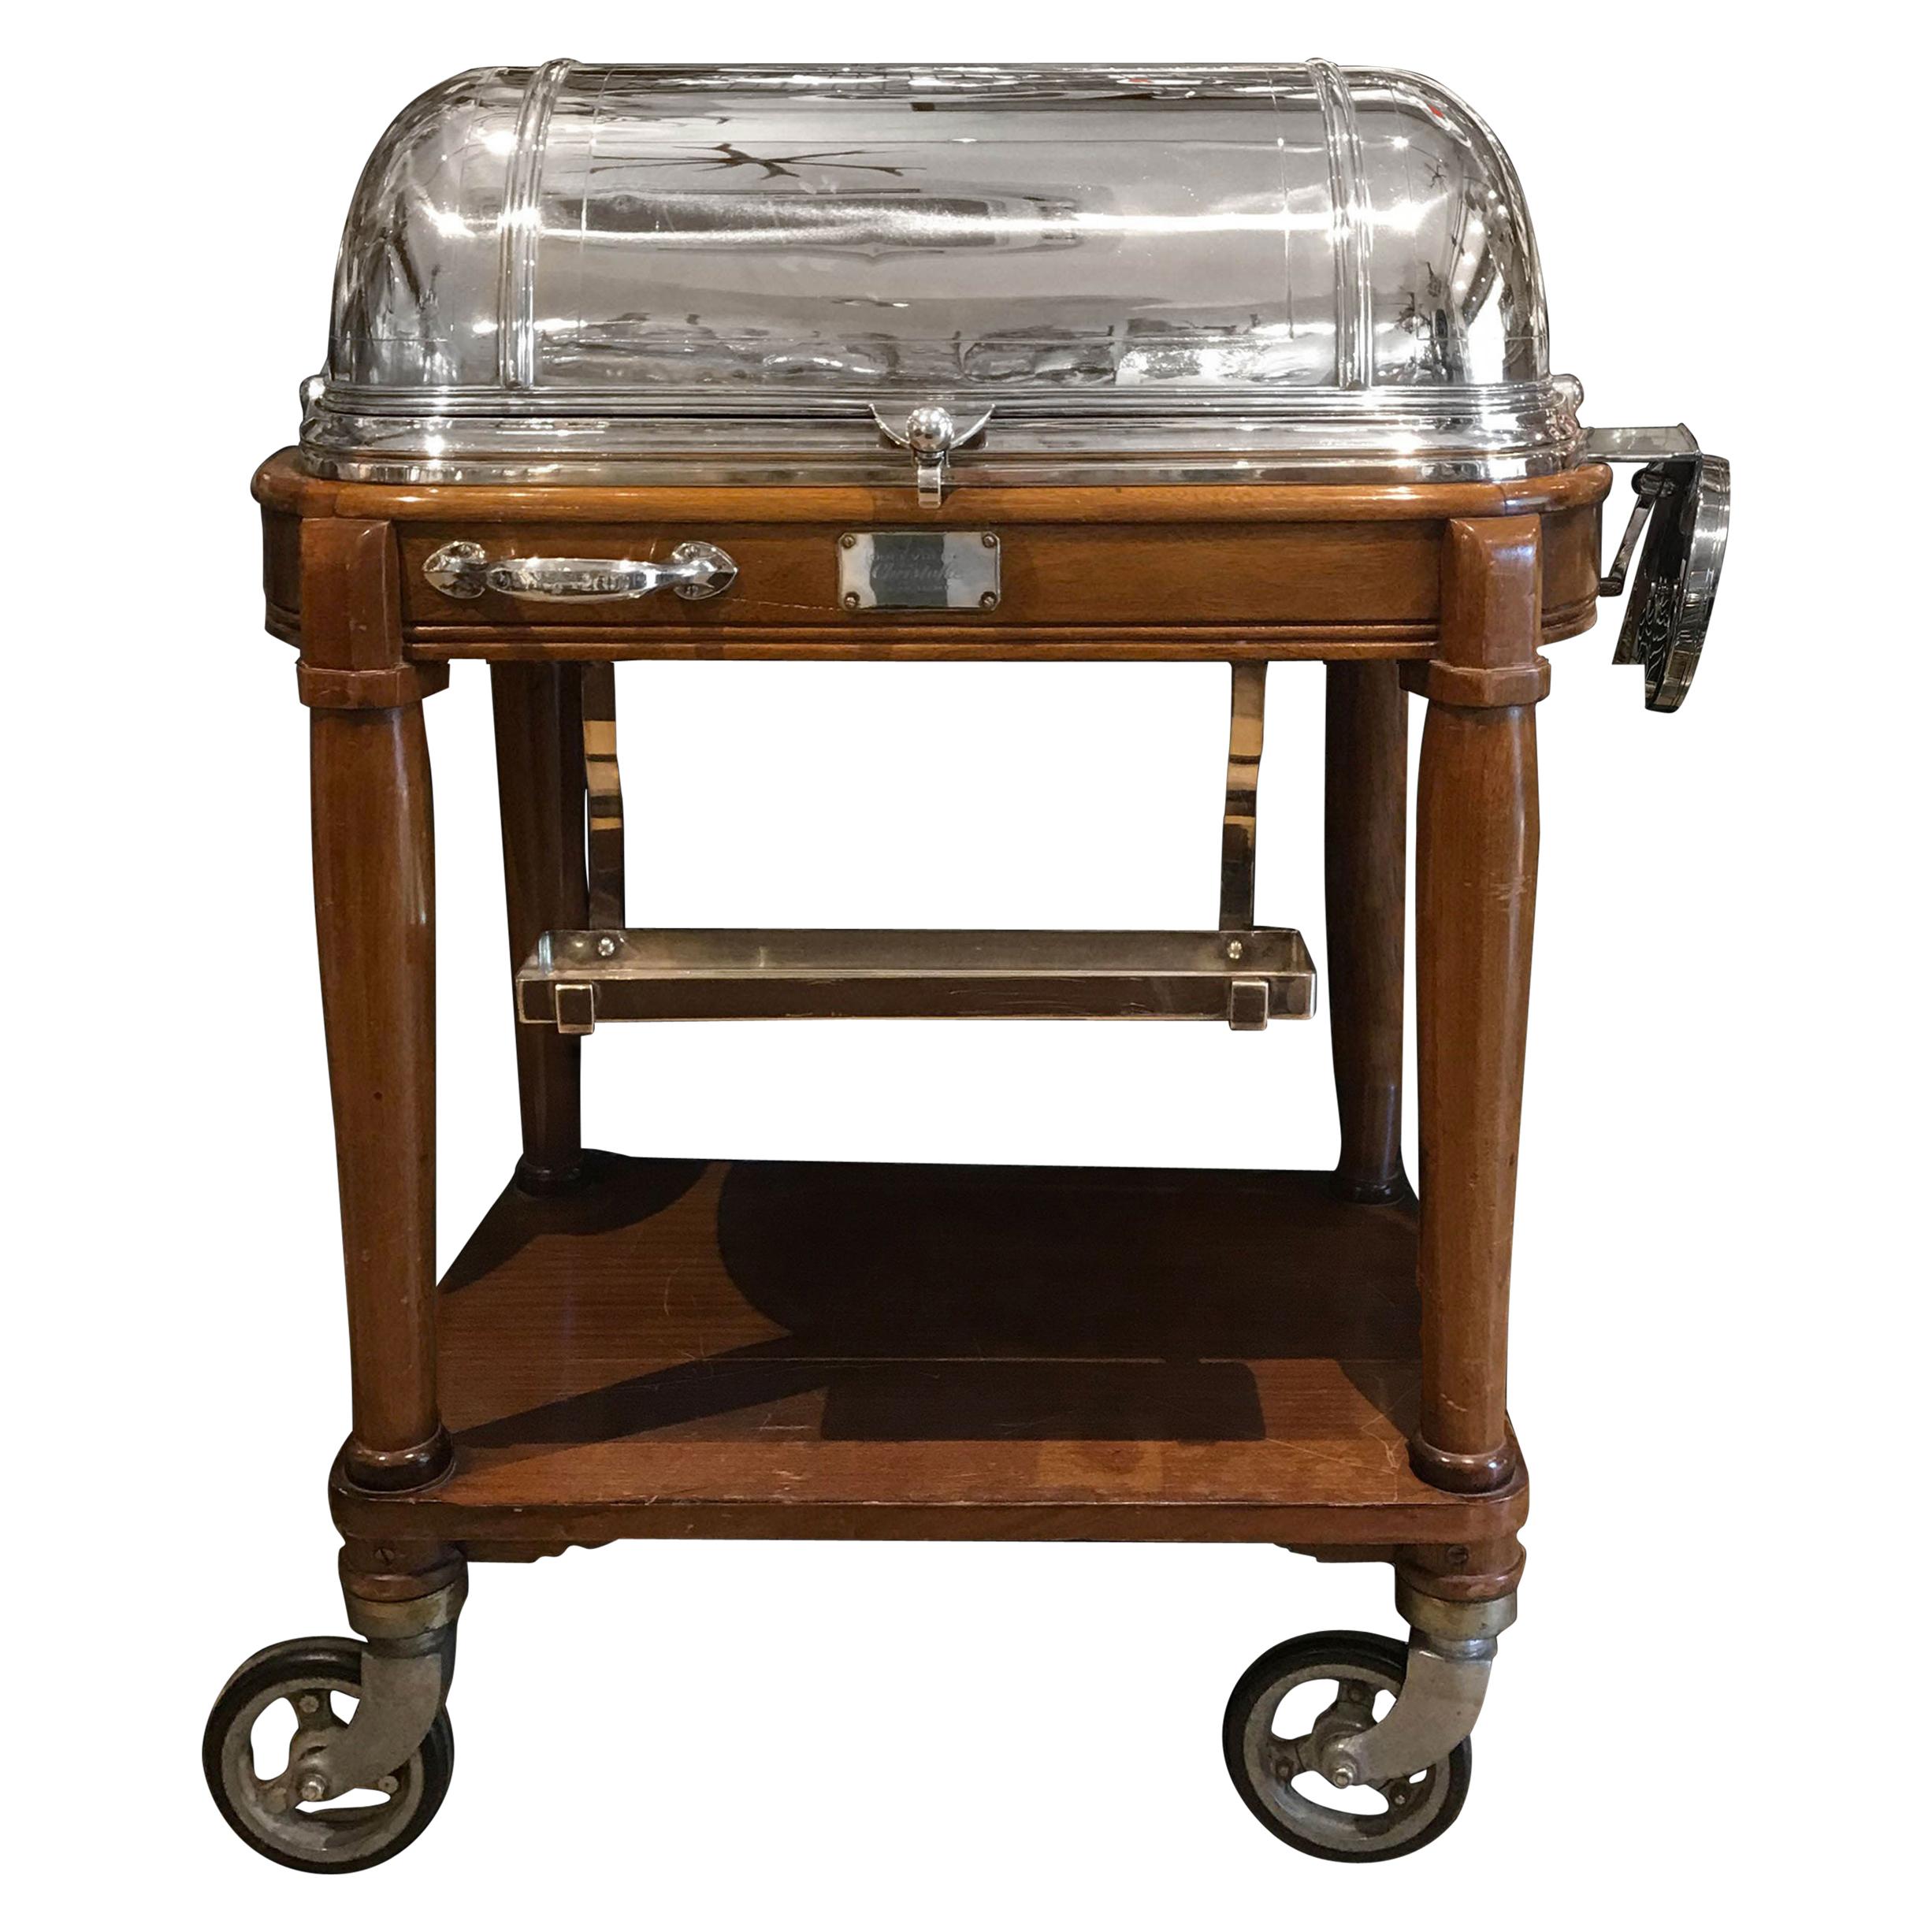 Carving-Trolley Designed by Christofle, Silver Plated, circa 1940